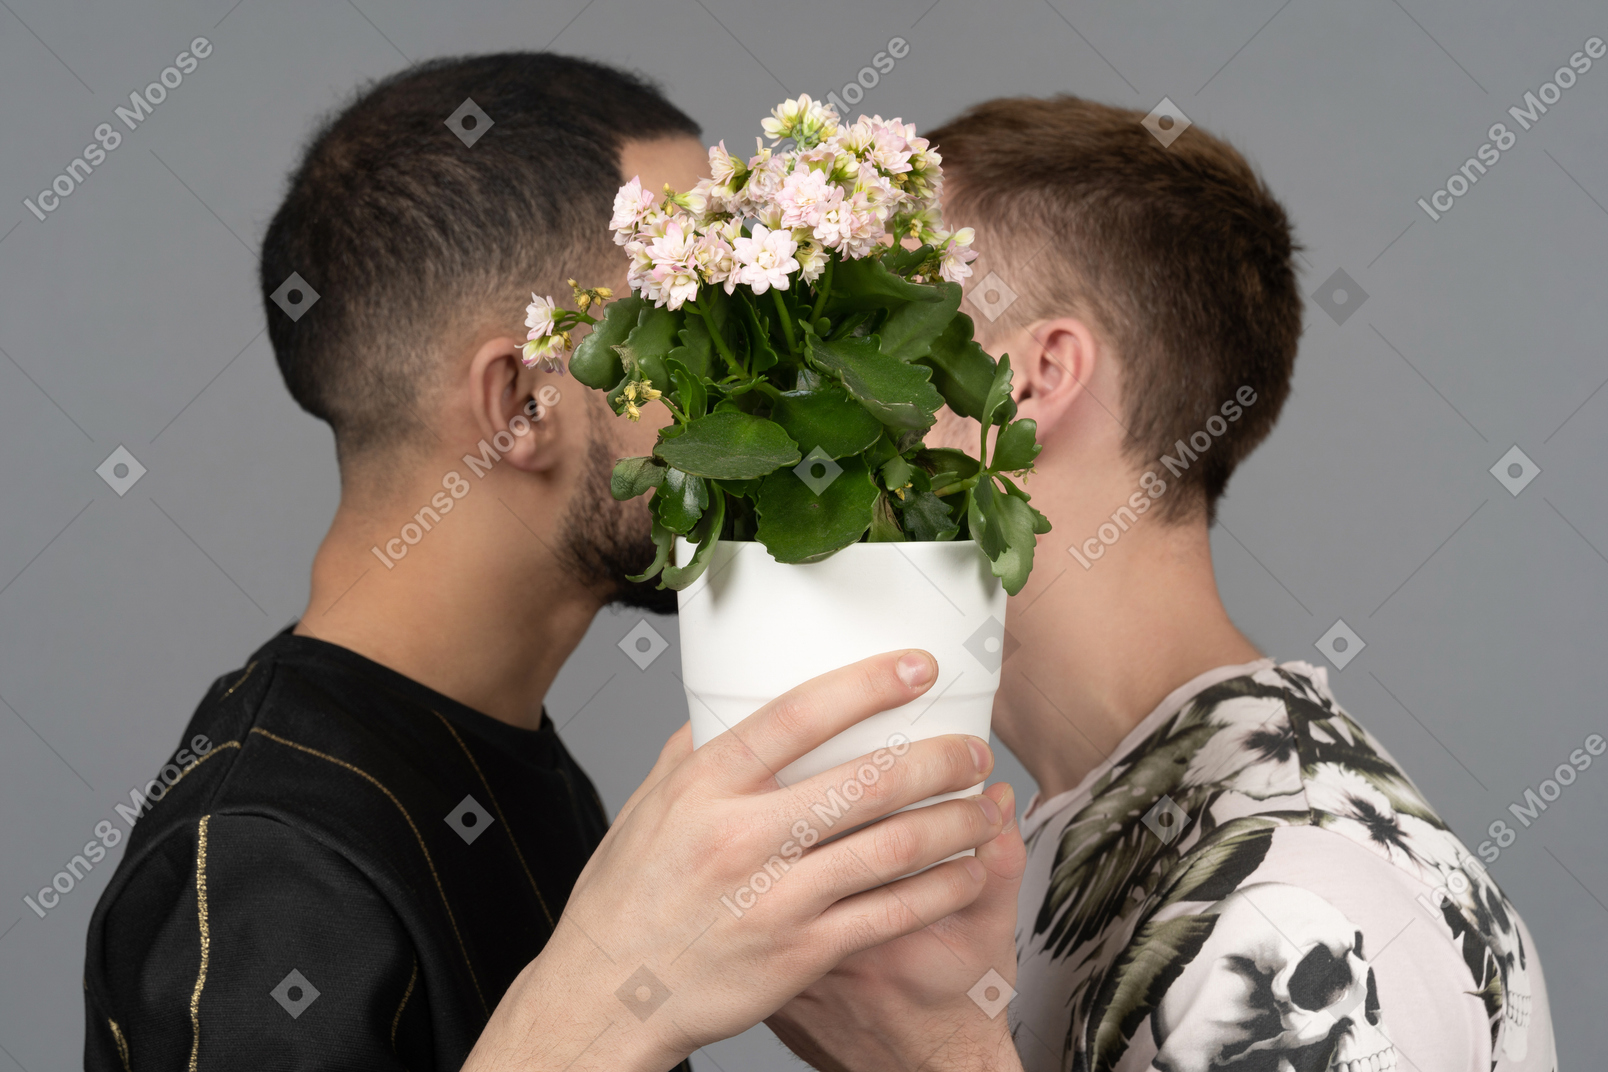 Close-up of two young man holding a flower pot to cover their faces